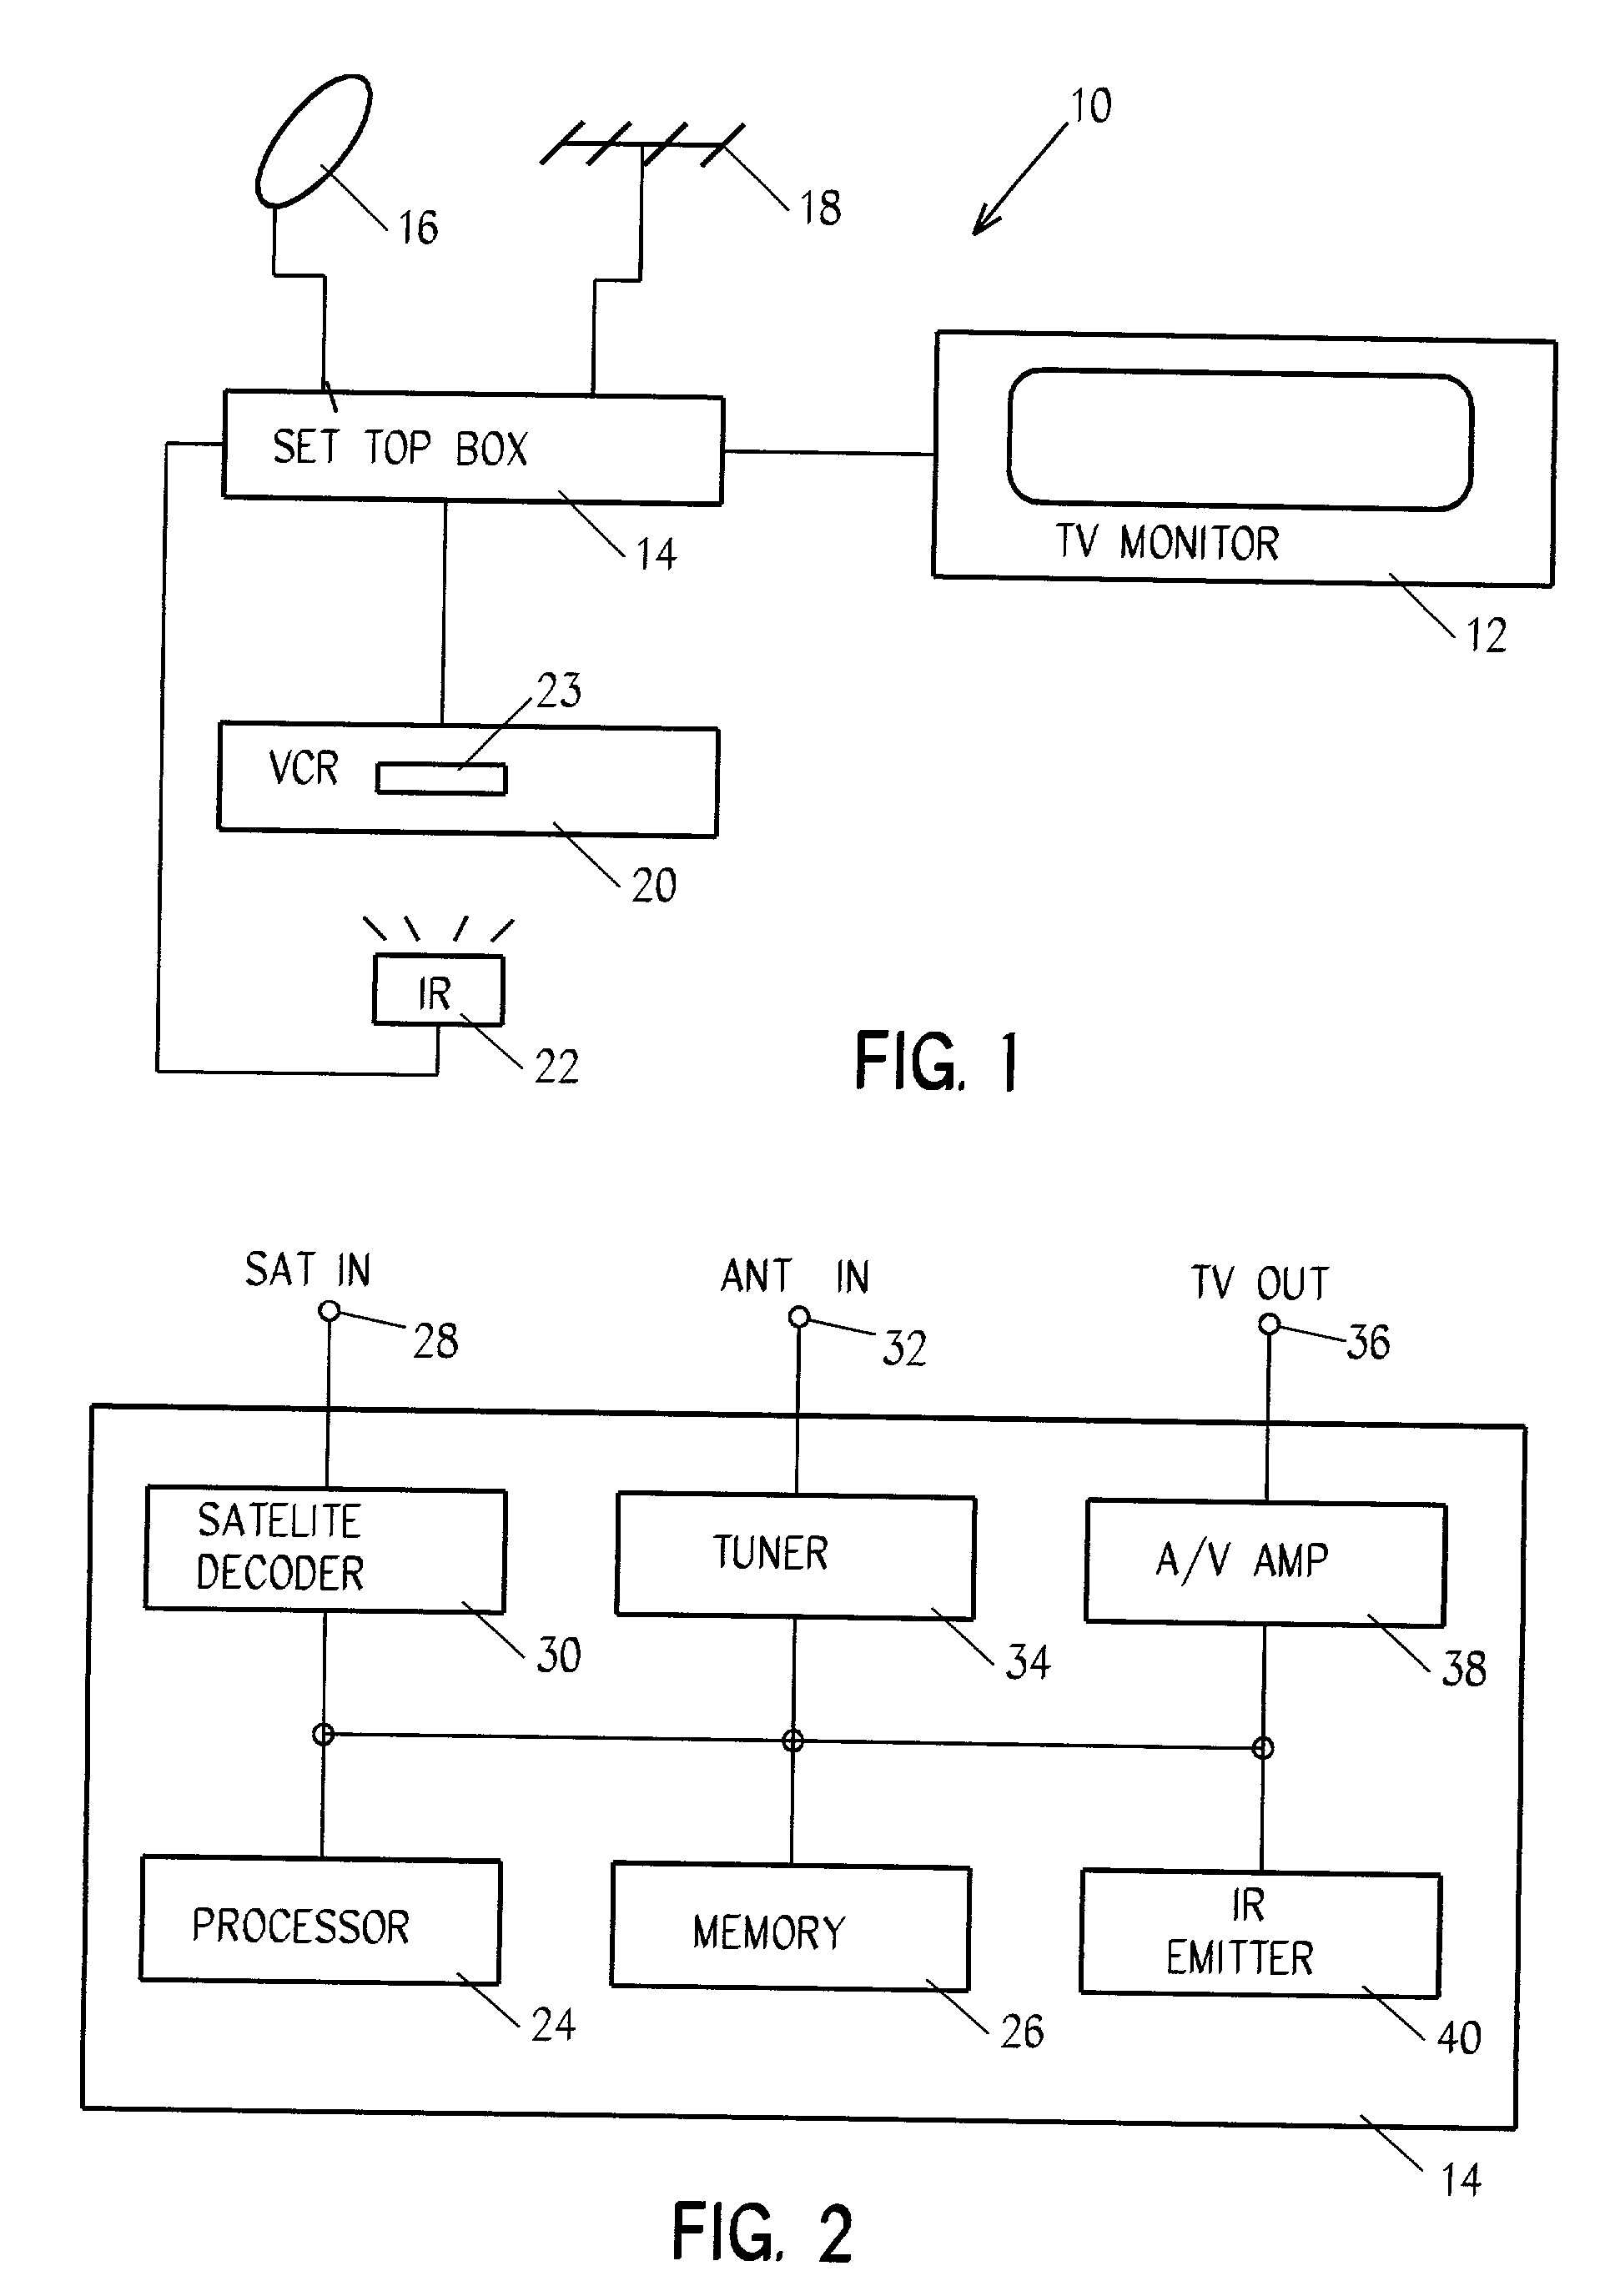 System and method for managing access to TV channels and shows